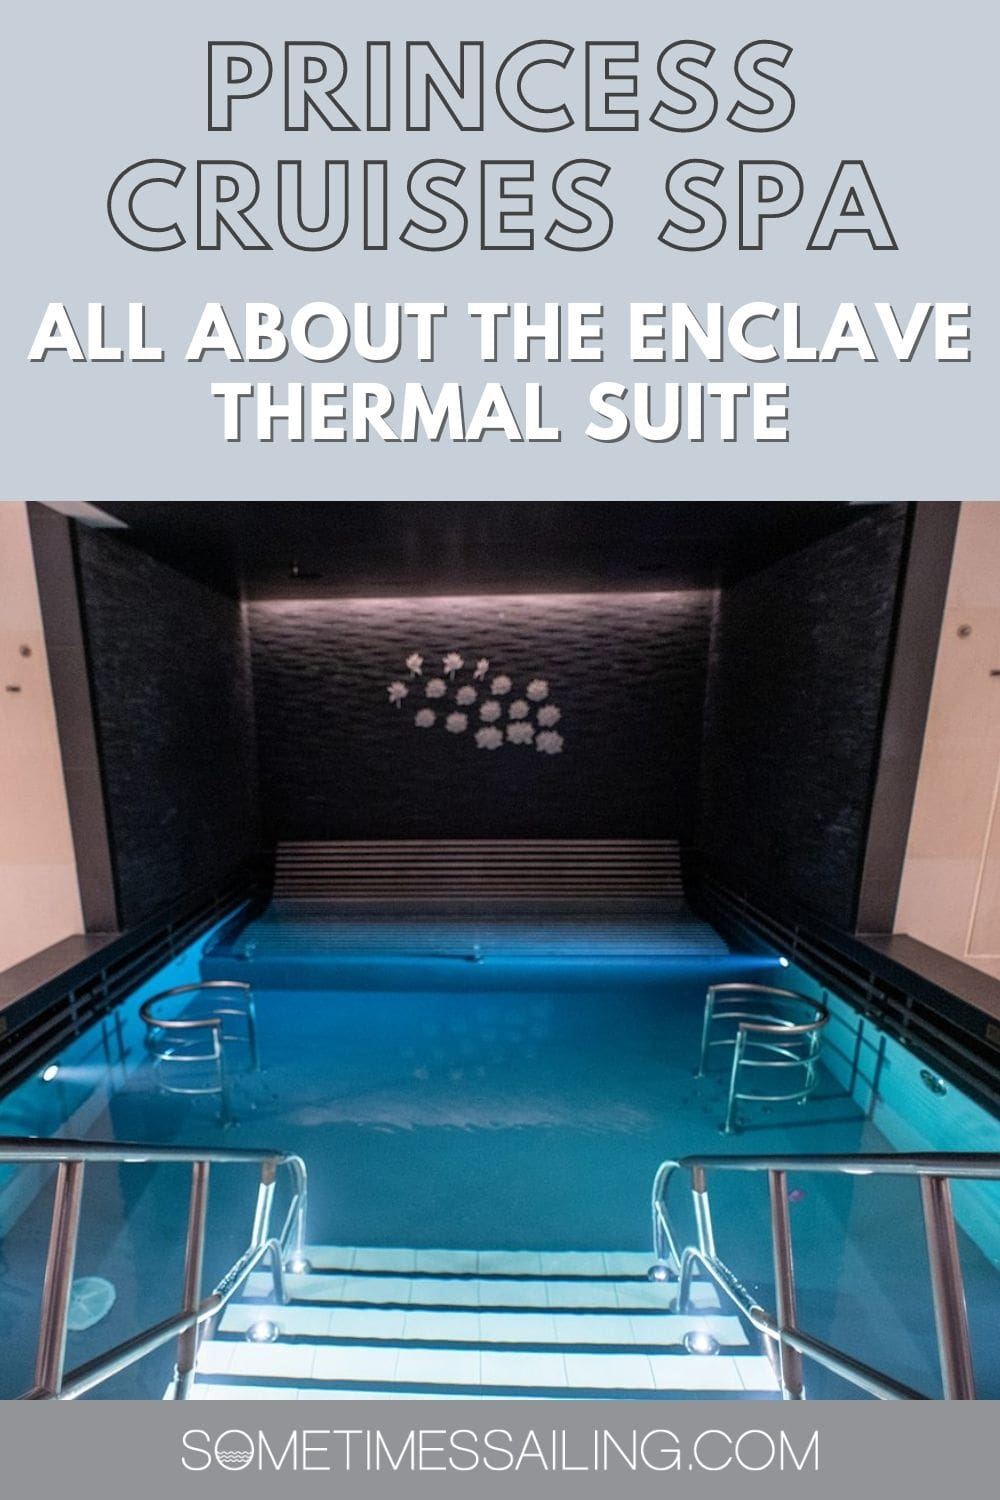 Princess Cruises: All about The Enclave Thermal Suite, with a photo of the blue thermal pool beneath the text.